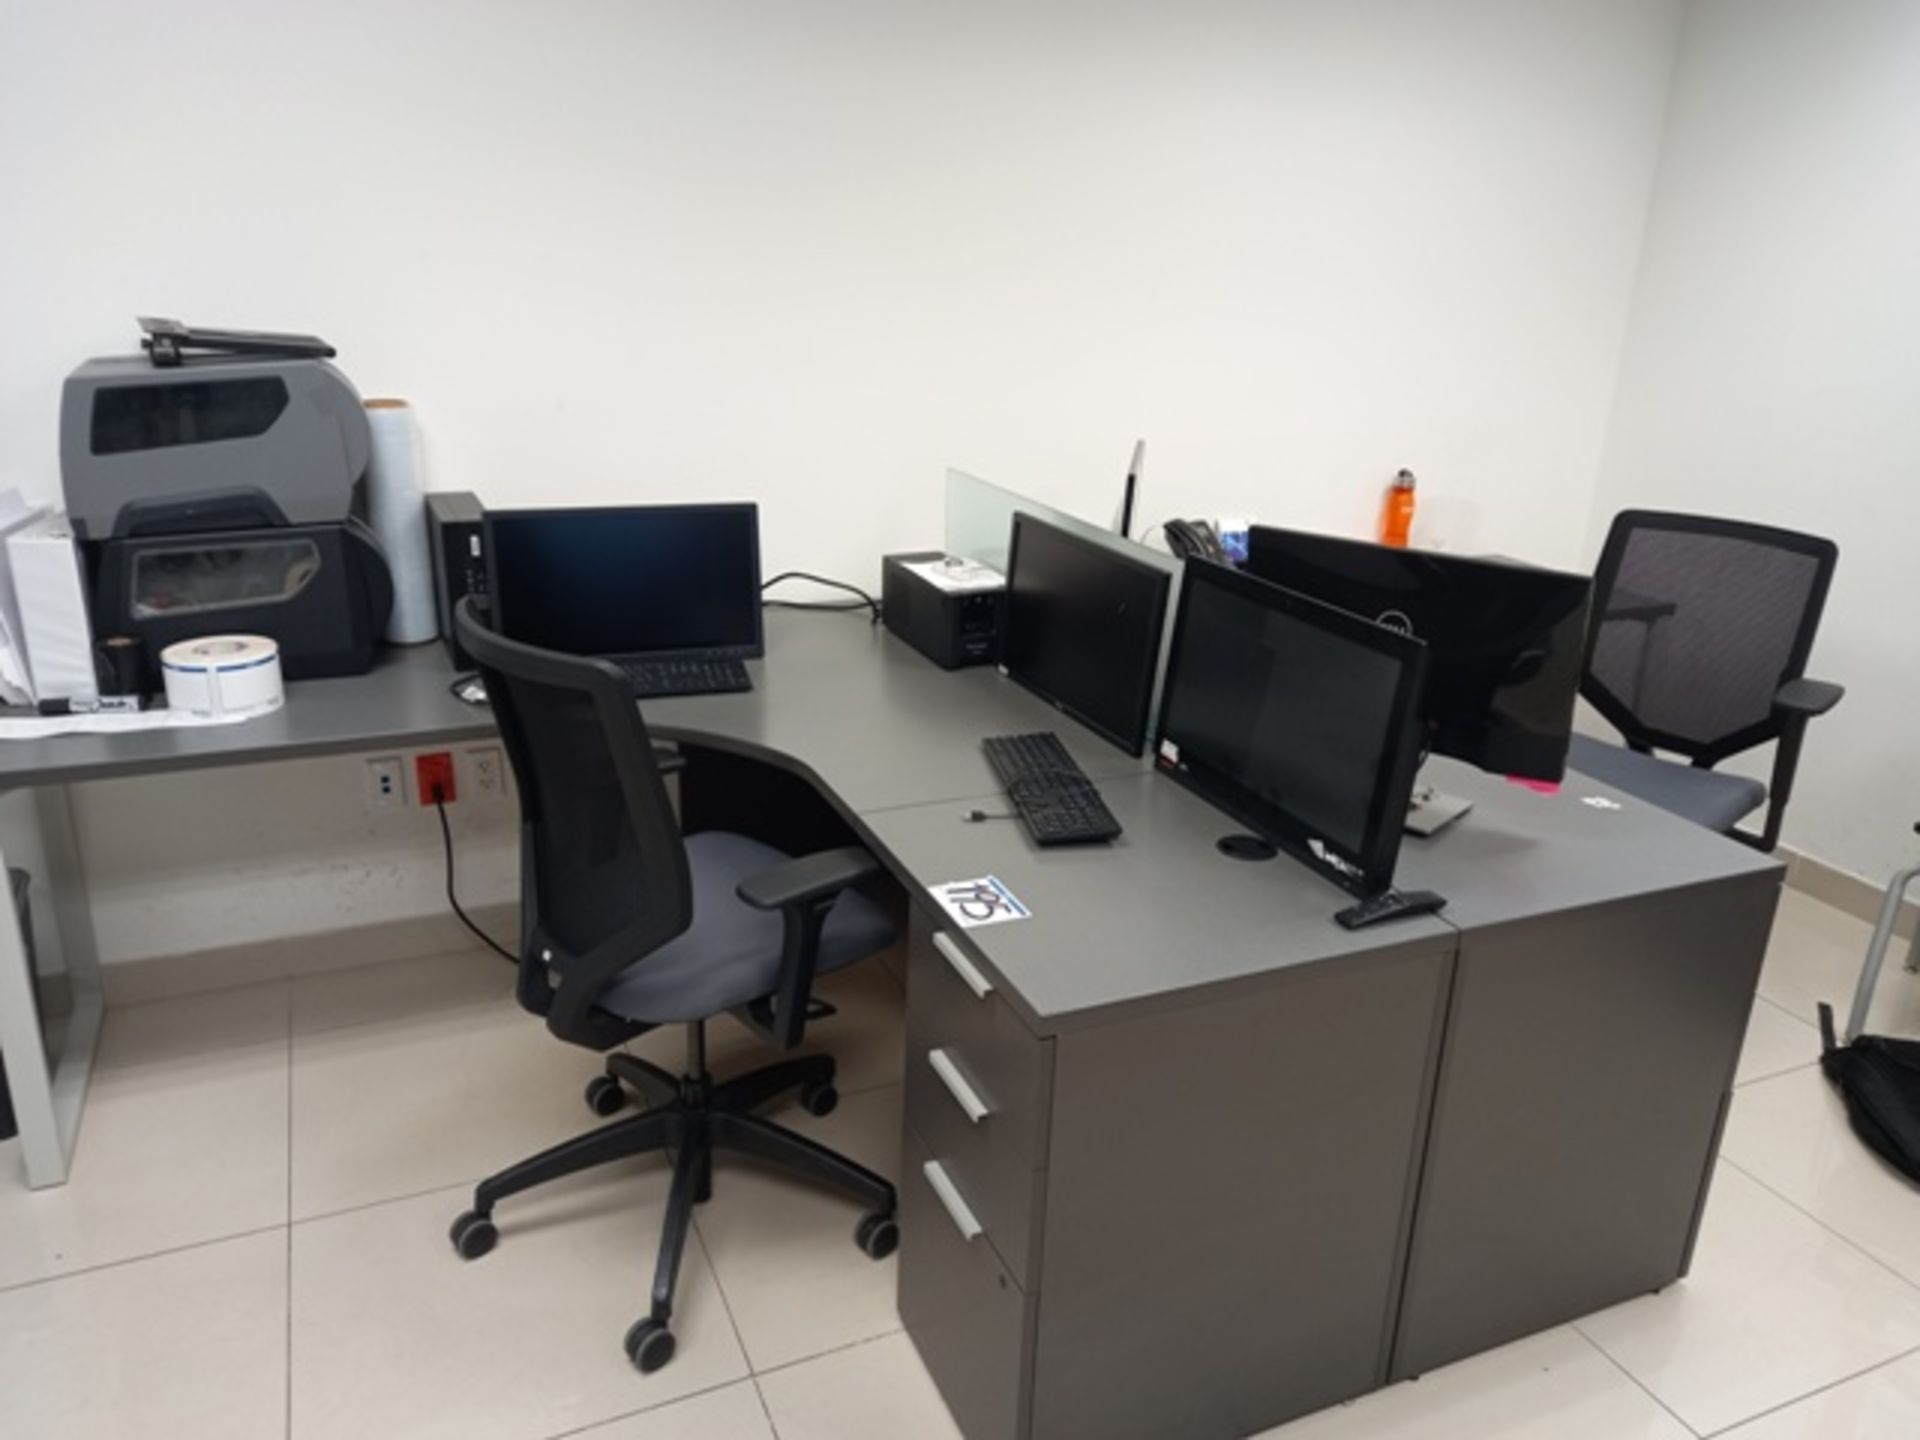 (29) Pcs Office Furniture and Computer Equipment Consisting of: (2) 2 Person Work Stations and more - Image 12 of 33